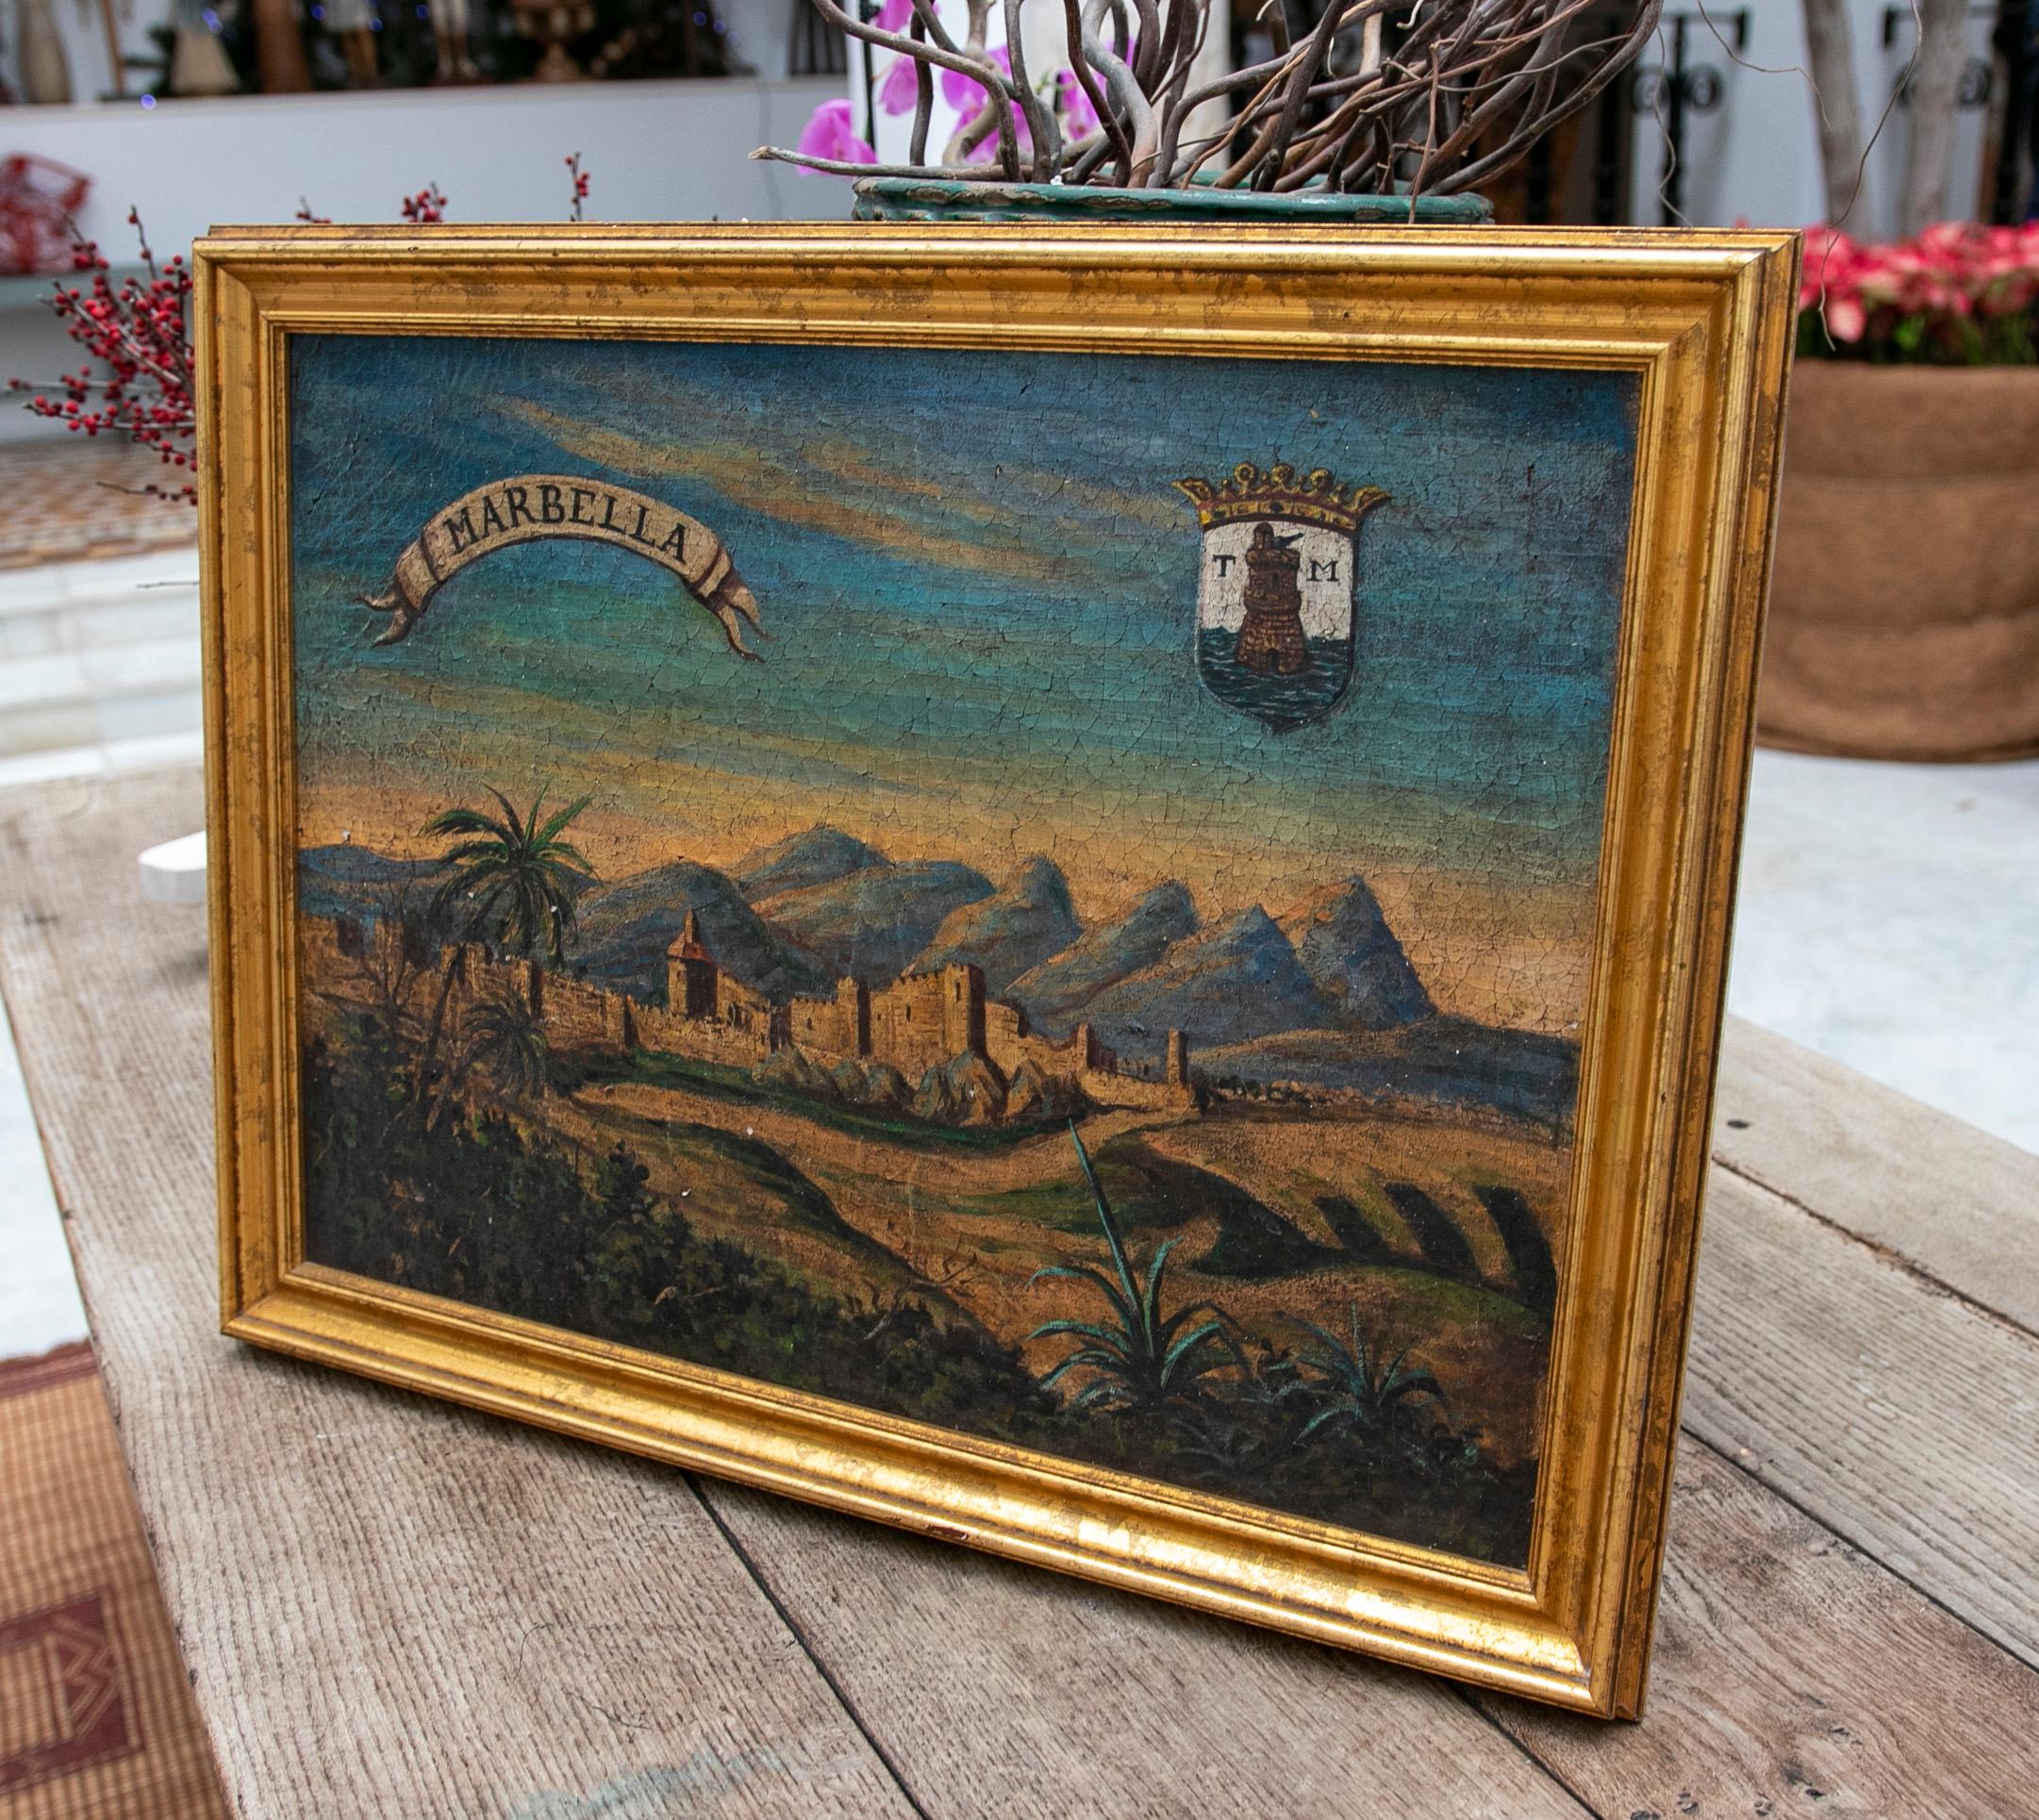 Decorative Oil on Canvas Painting of the City of Marbella 
Measurements with frame: 56x73x3cm